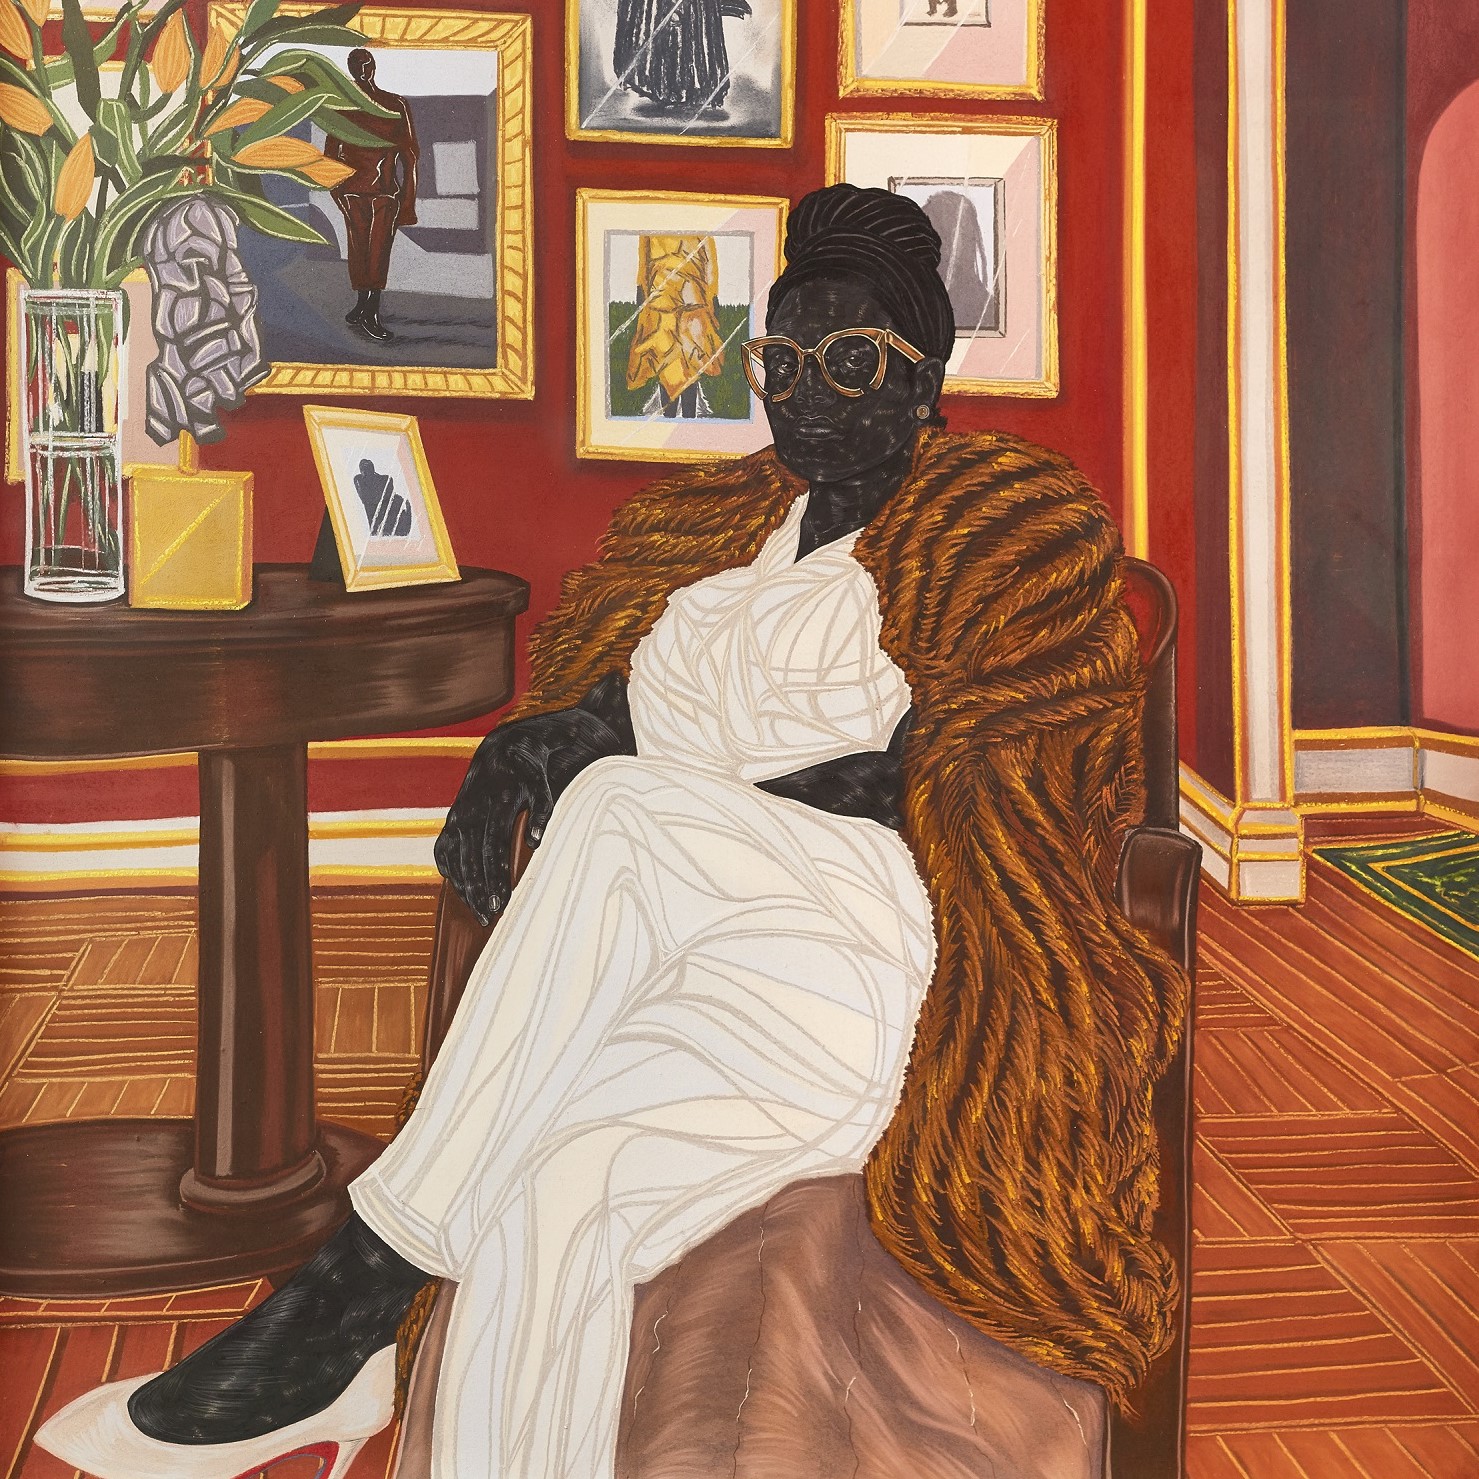 The Marchioness by Toyin Ojin Odutola, 2016 (detail). © Toyin Ojin Odutola. Courtesy the artist and Jack Shainman Gallery, New York. Photo courtesy of North Carolina Museum of Art, Raleigh.